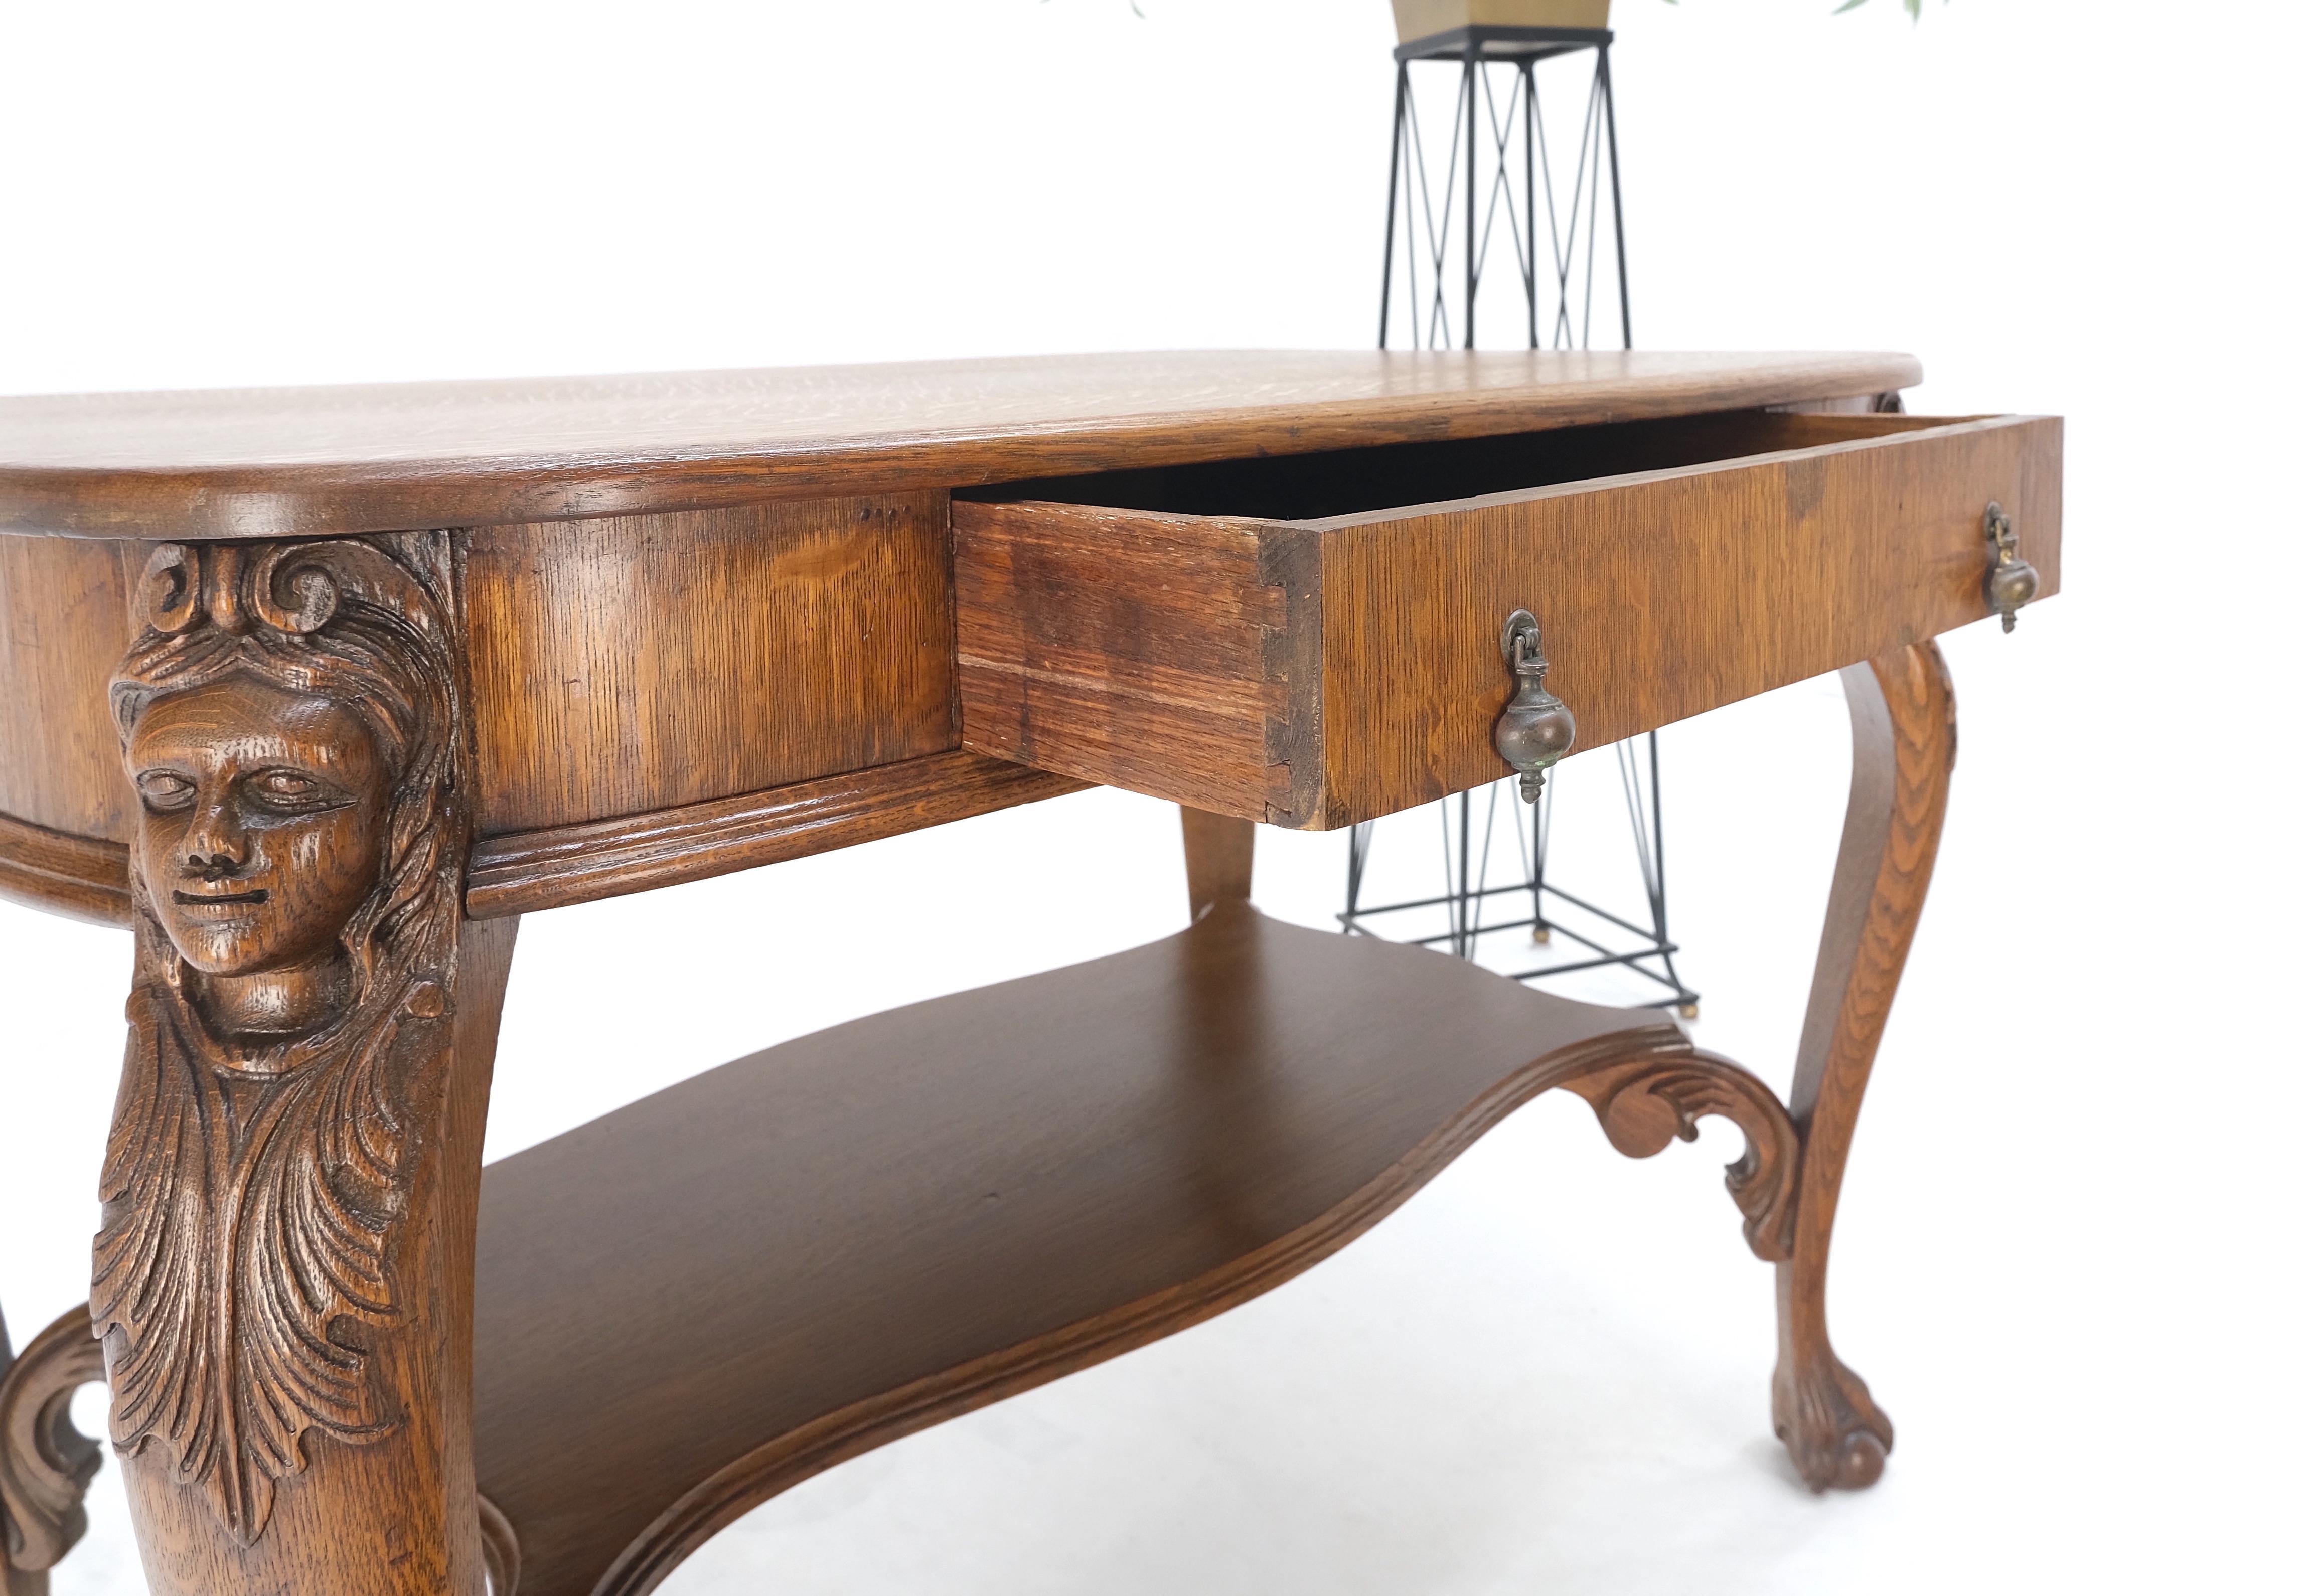 20th Century Art Nouveau Style Carved Faces Ball & Claw Feet Rounded Oak Desk Writing Table For Sale